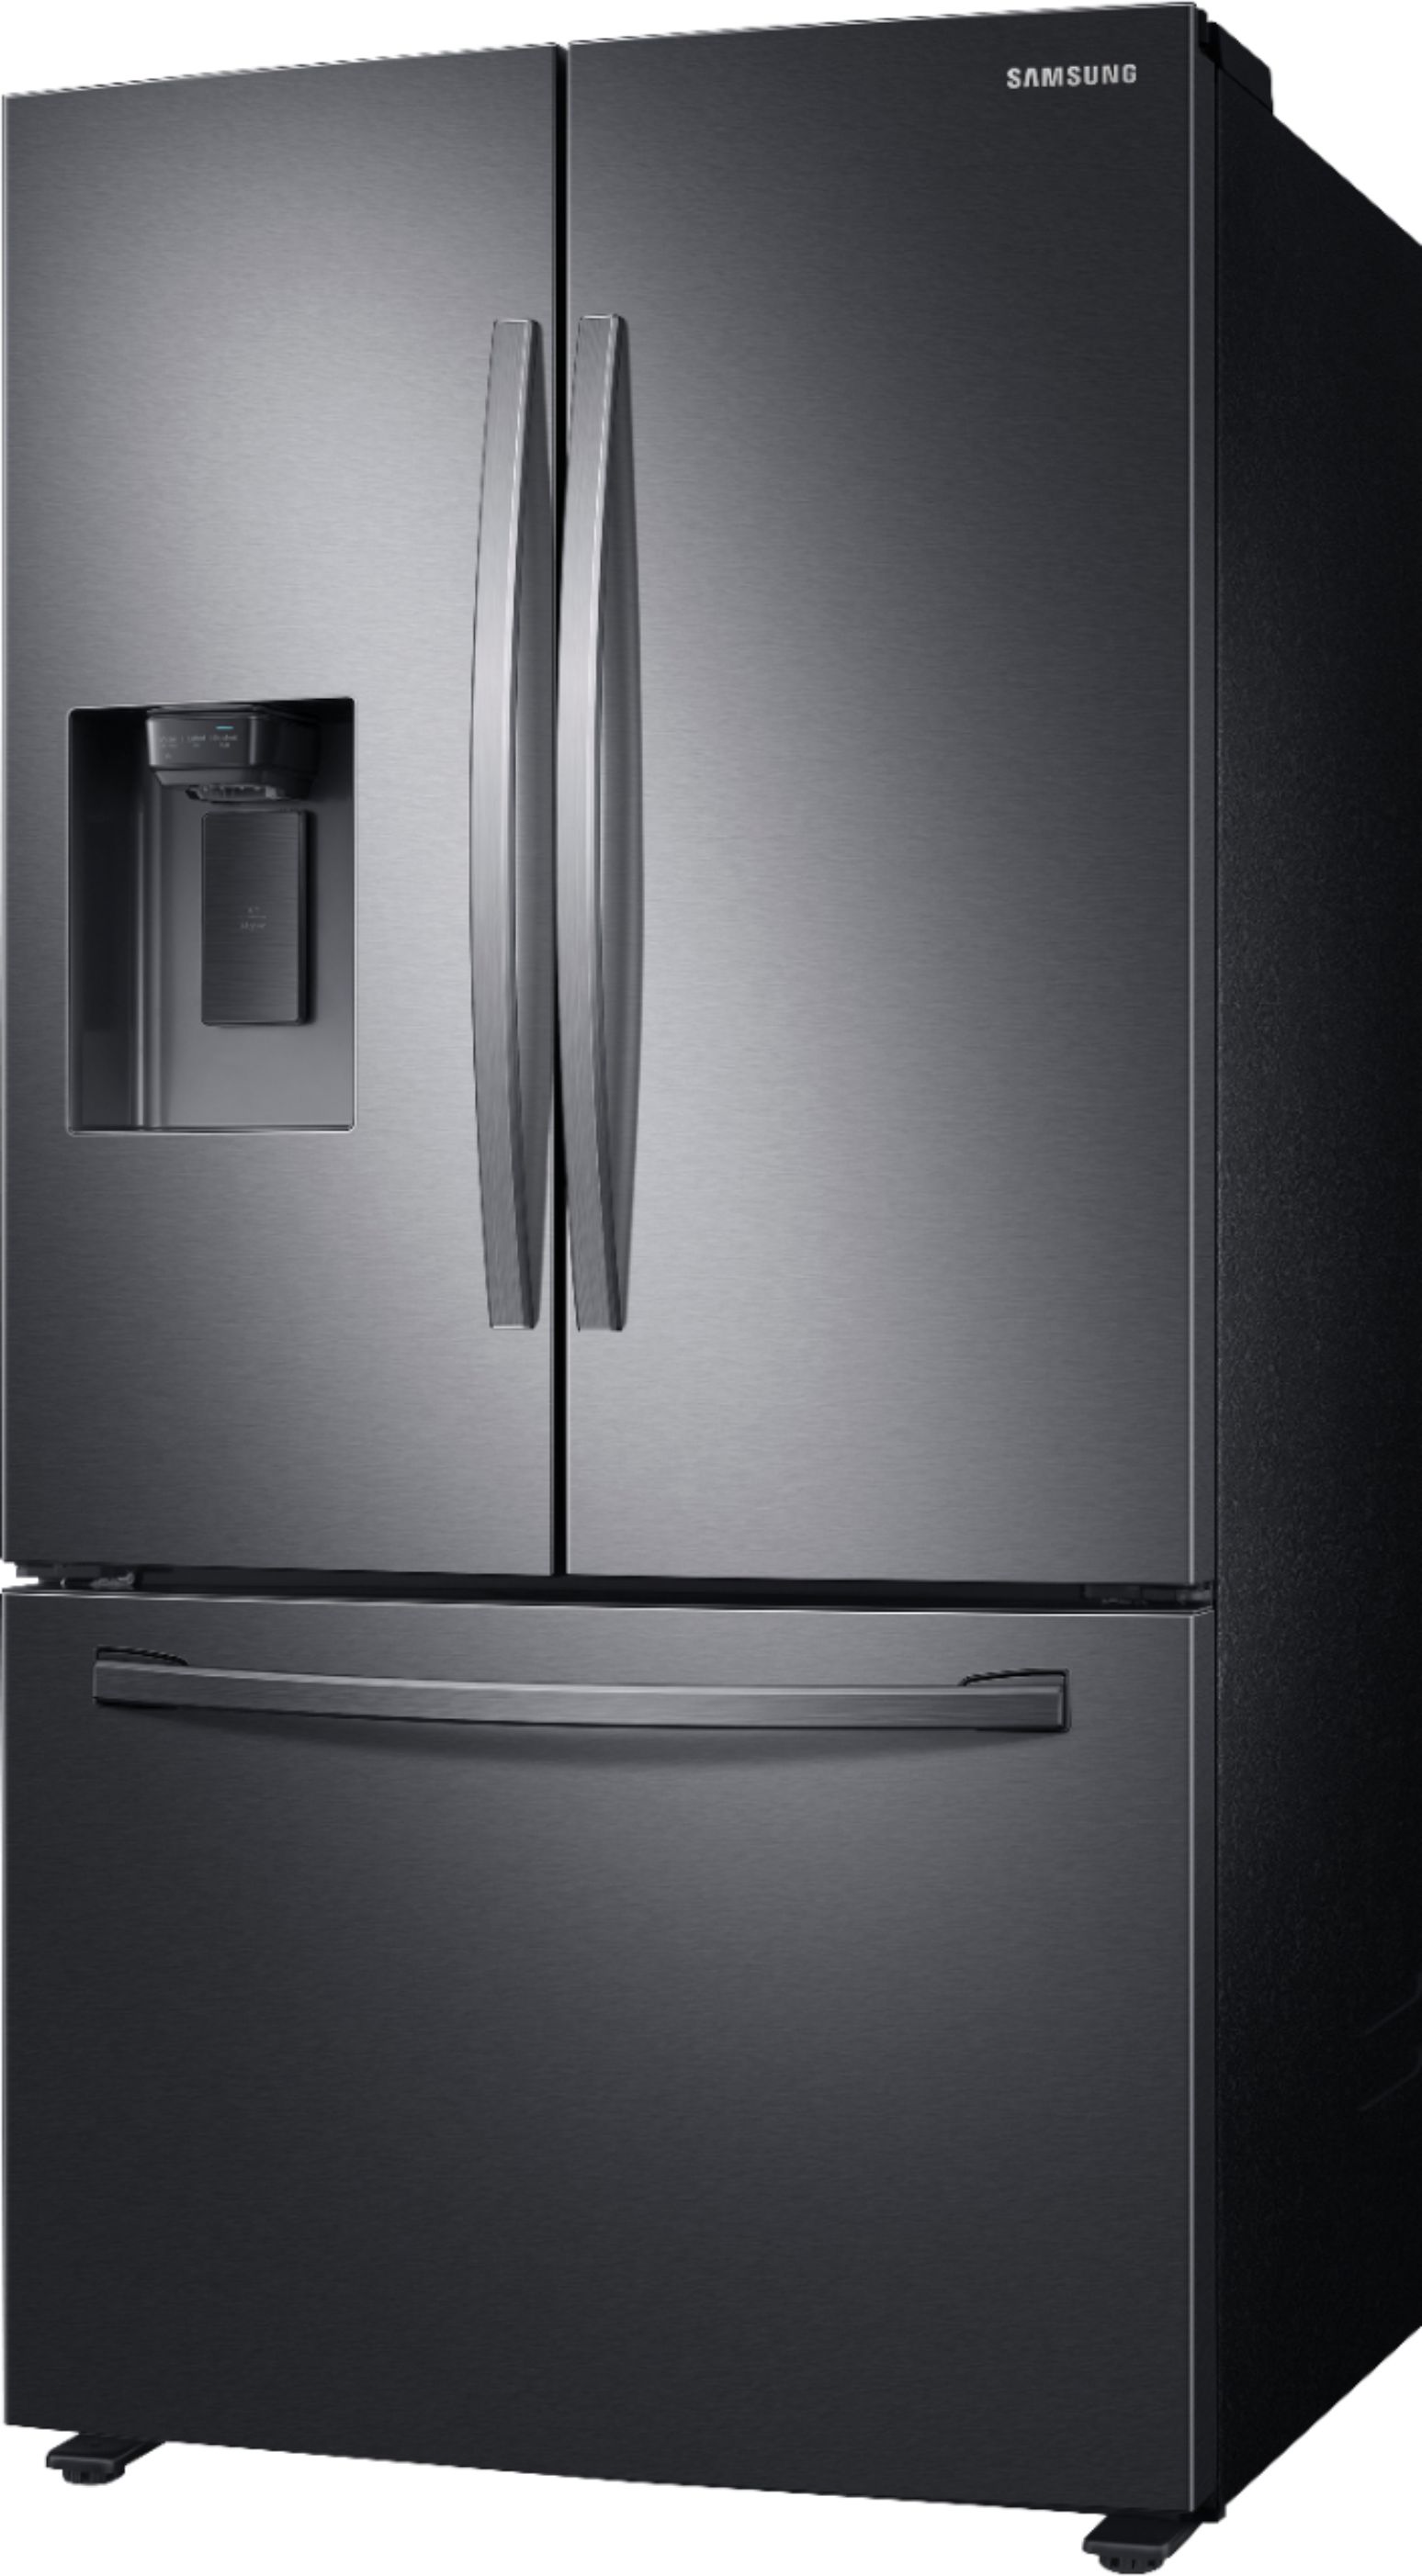 Angle View: Samsung - 27 cu. ft. 3-Door French Door Refrigerator with External Water & Ice Dispenser - Black Stainless Steel